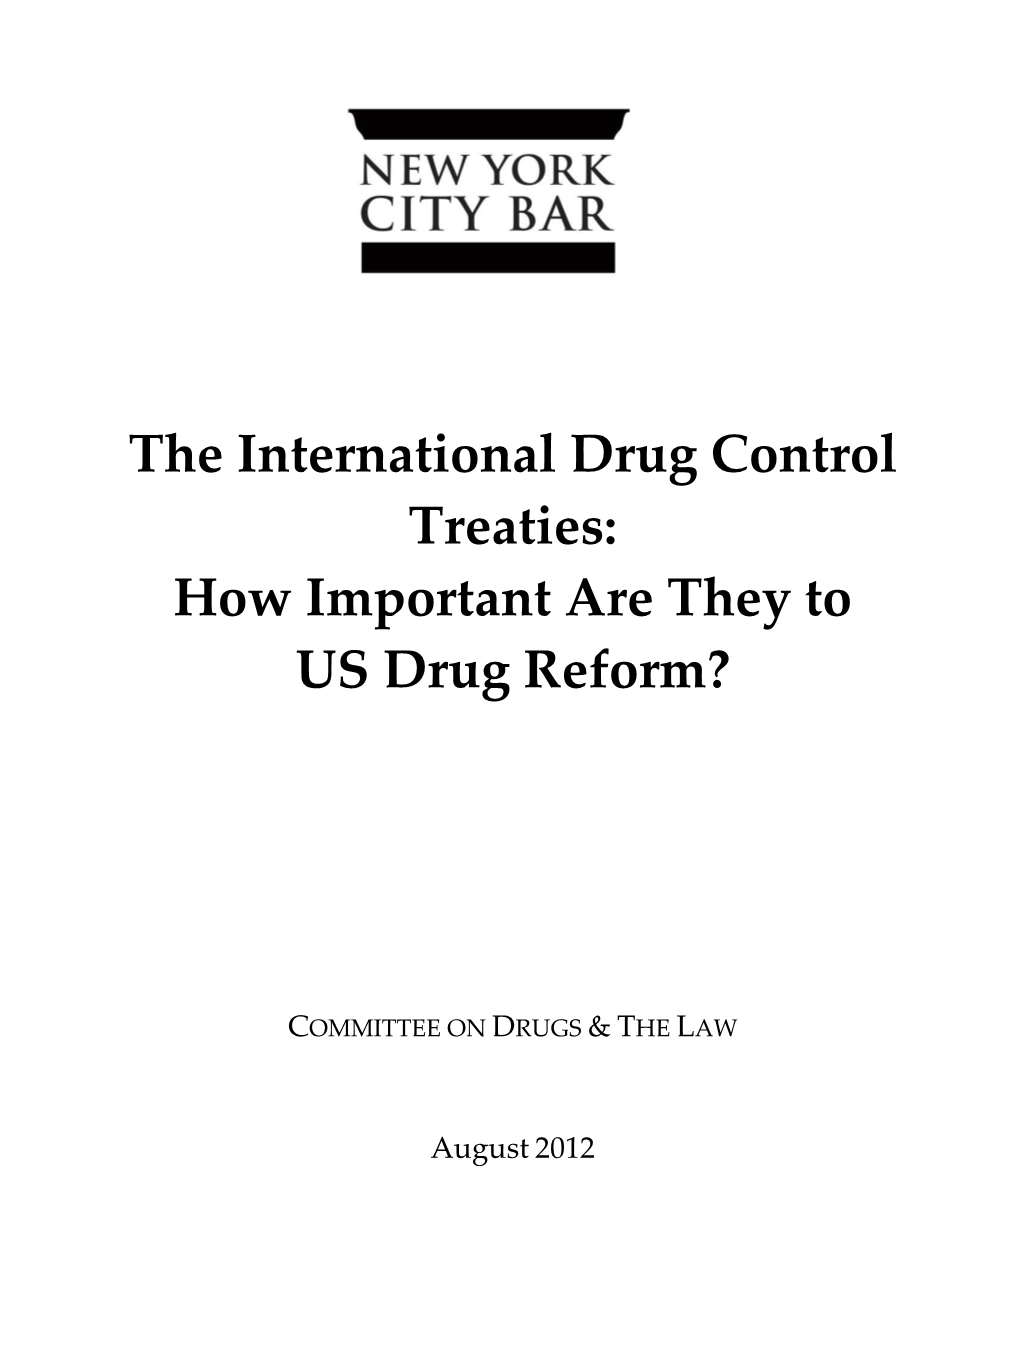 The International Drug Control Treaties: How Important Are They to US Drug Reform?